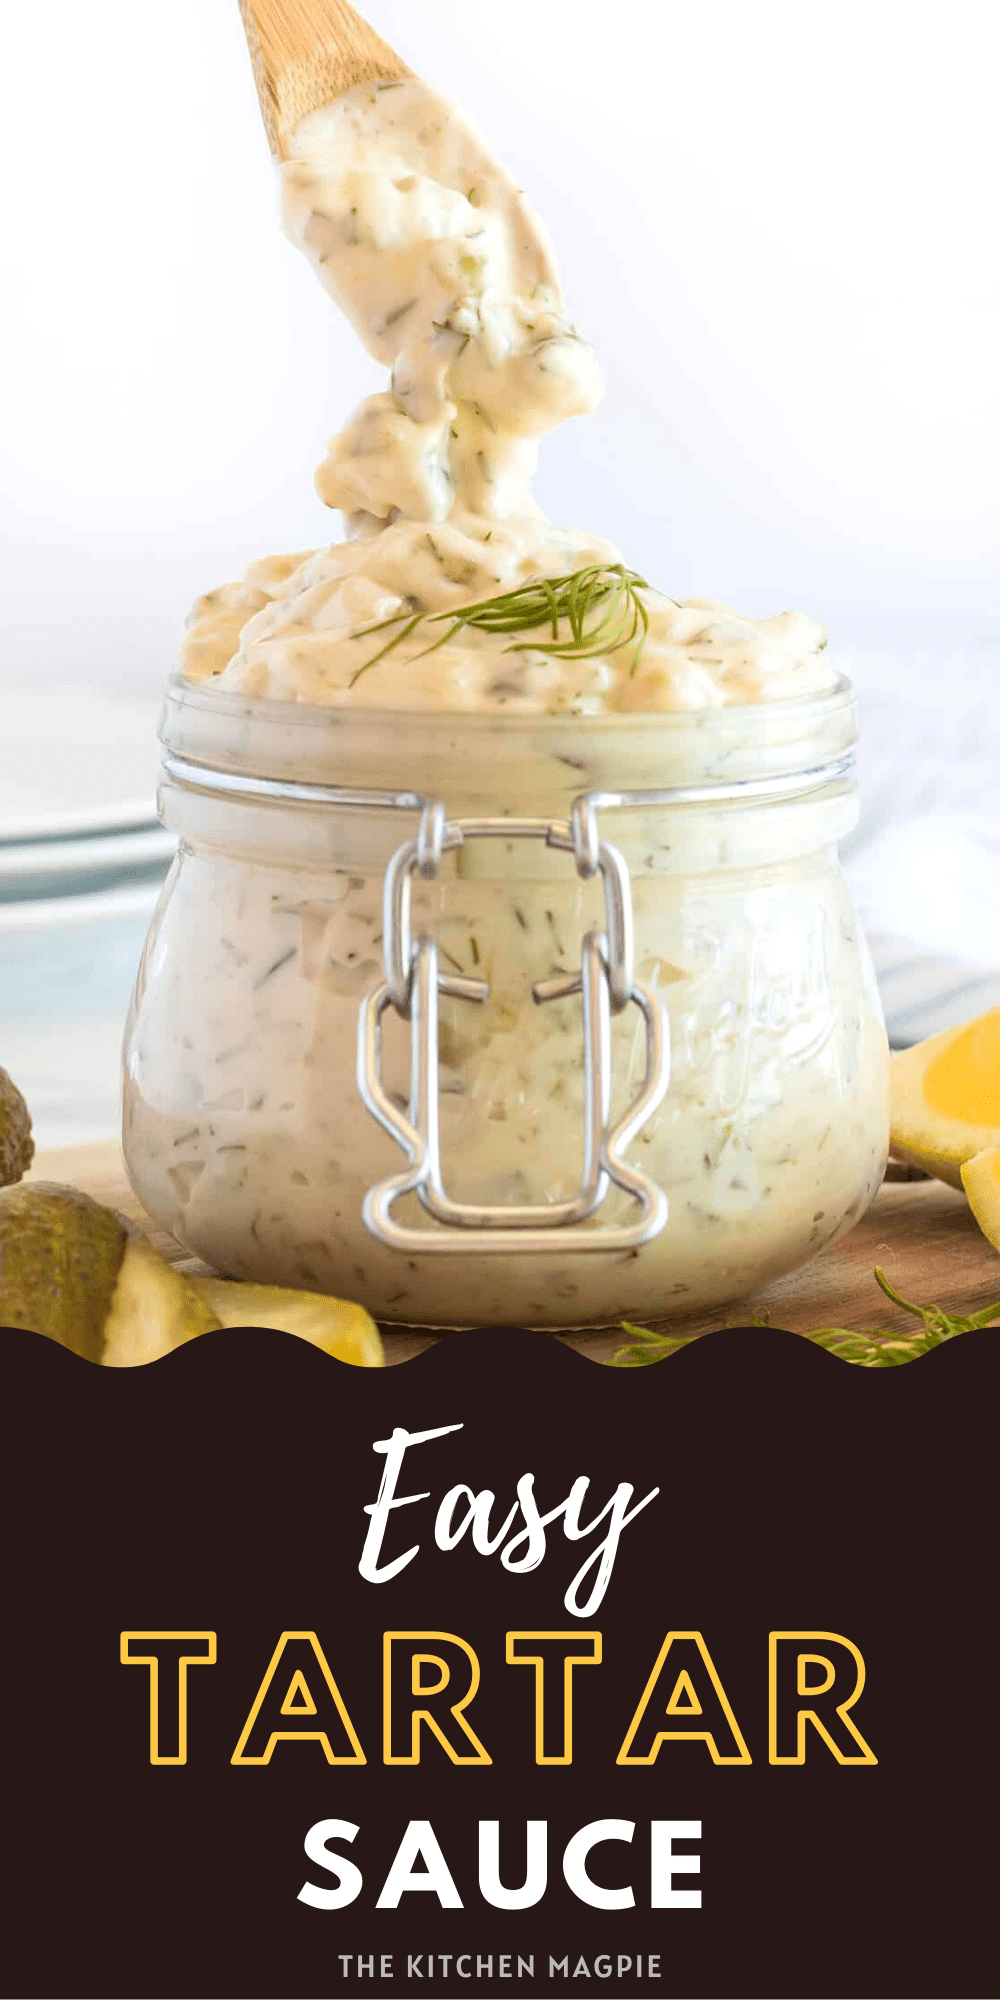 Delicious homemade tartar sauce that is perfect for for your seafood feast! Adjust the seasonings to your personal tastes.